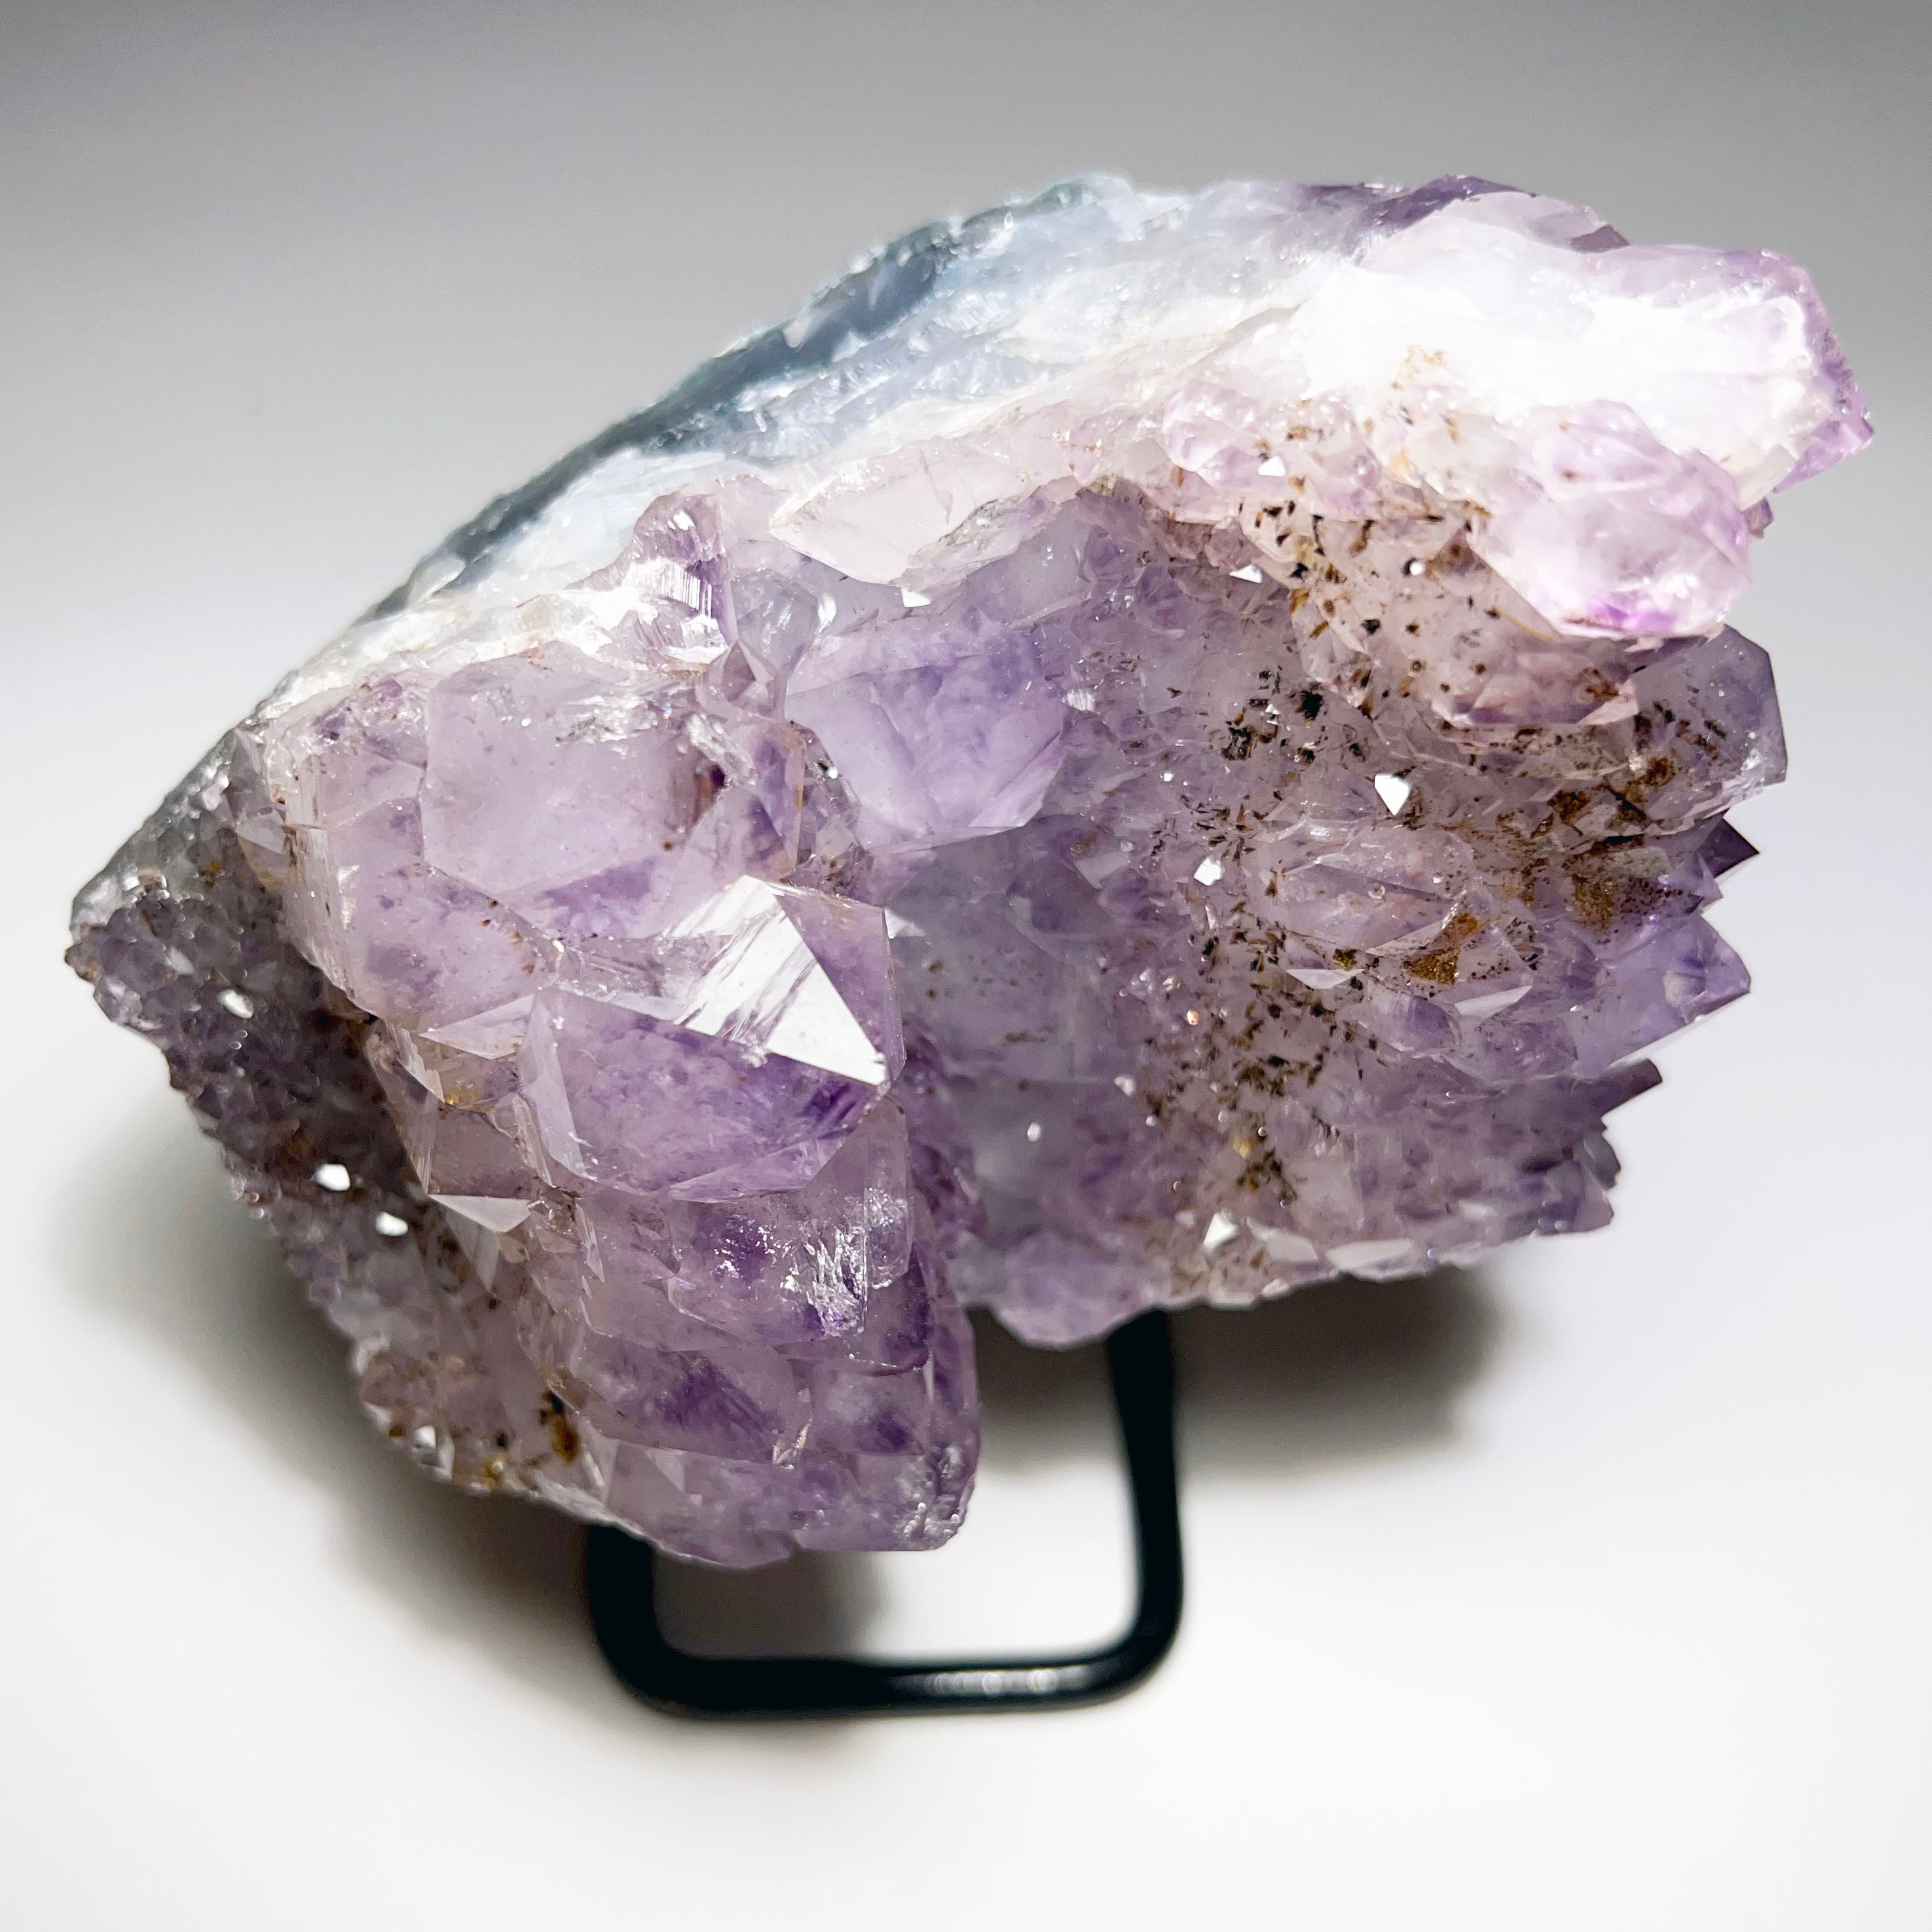 Amethyst with Goethite on stand